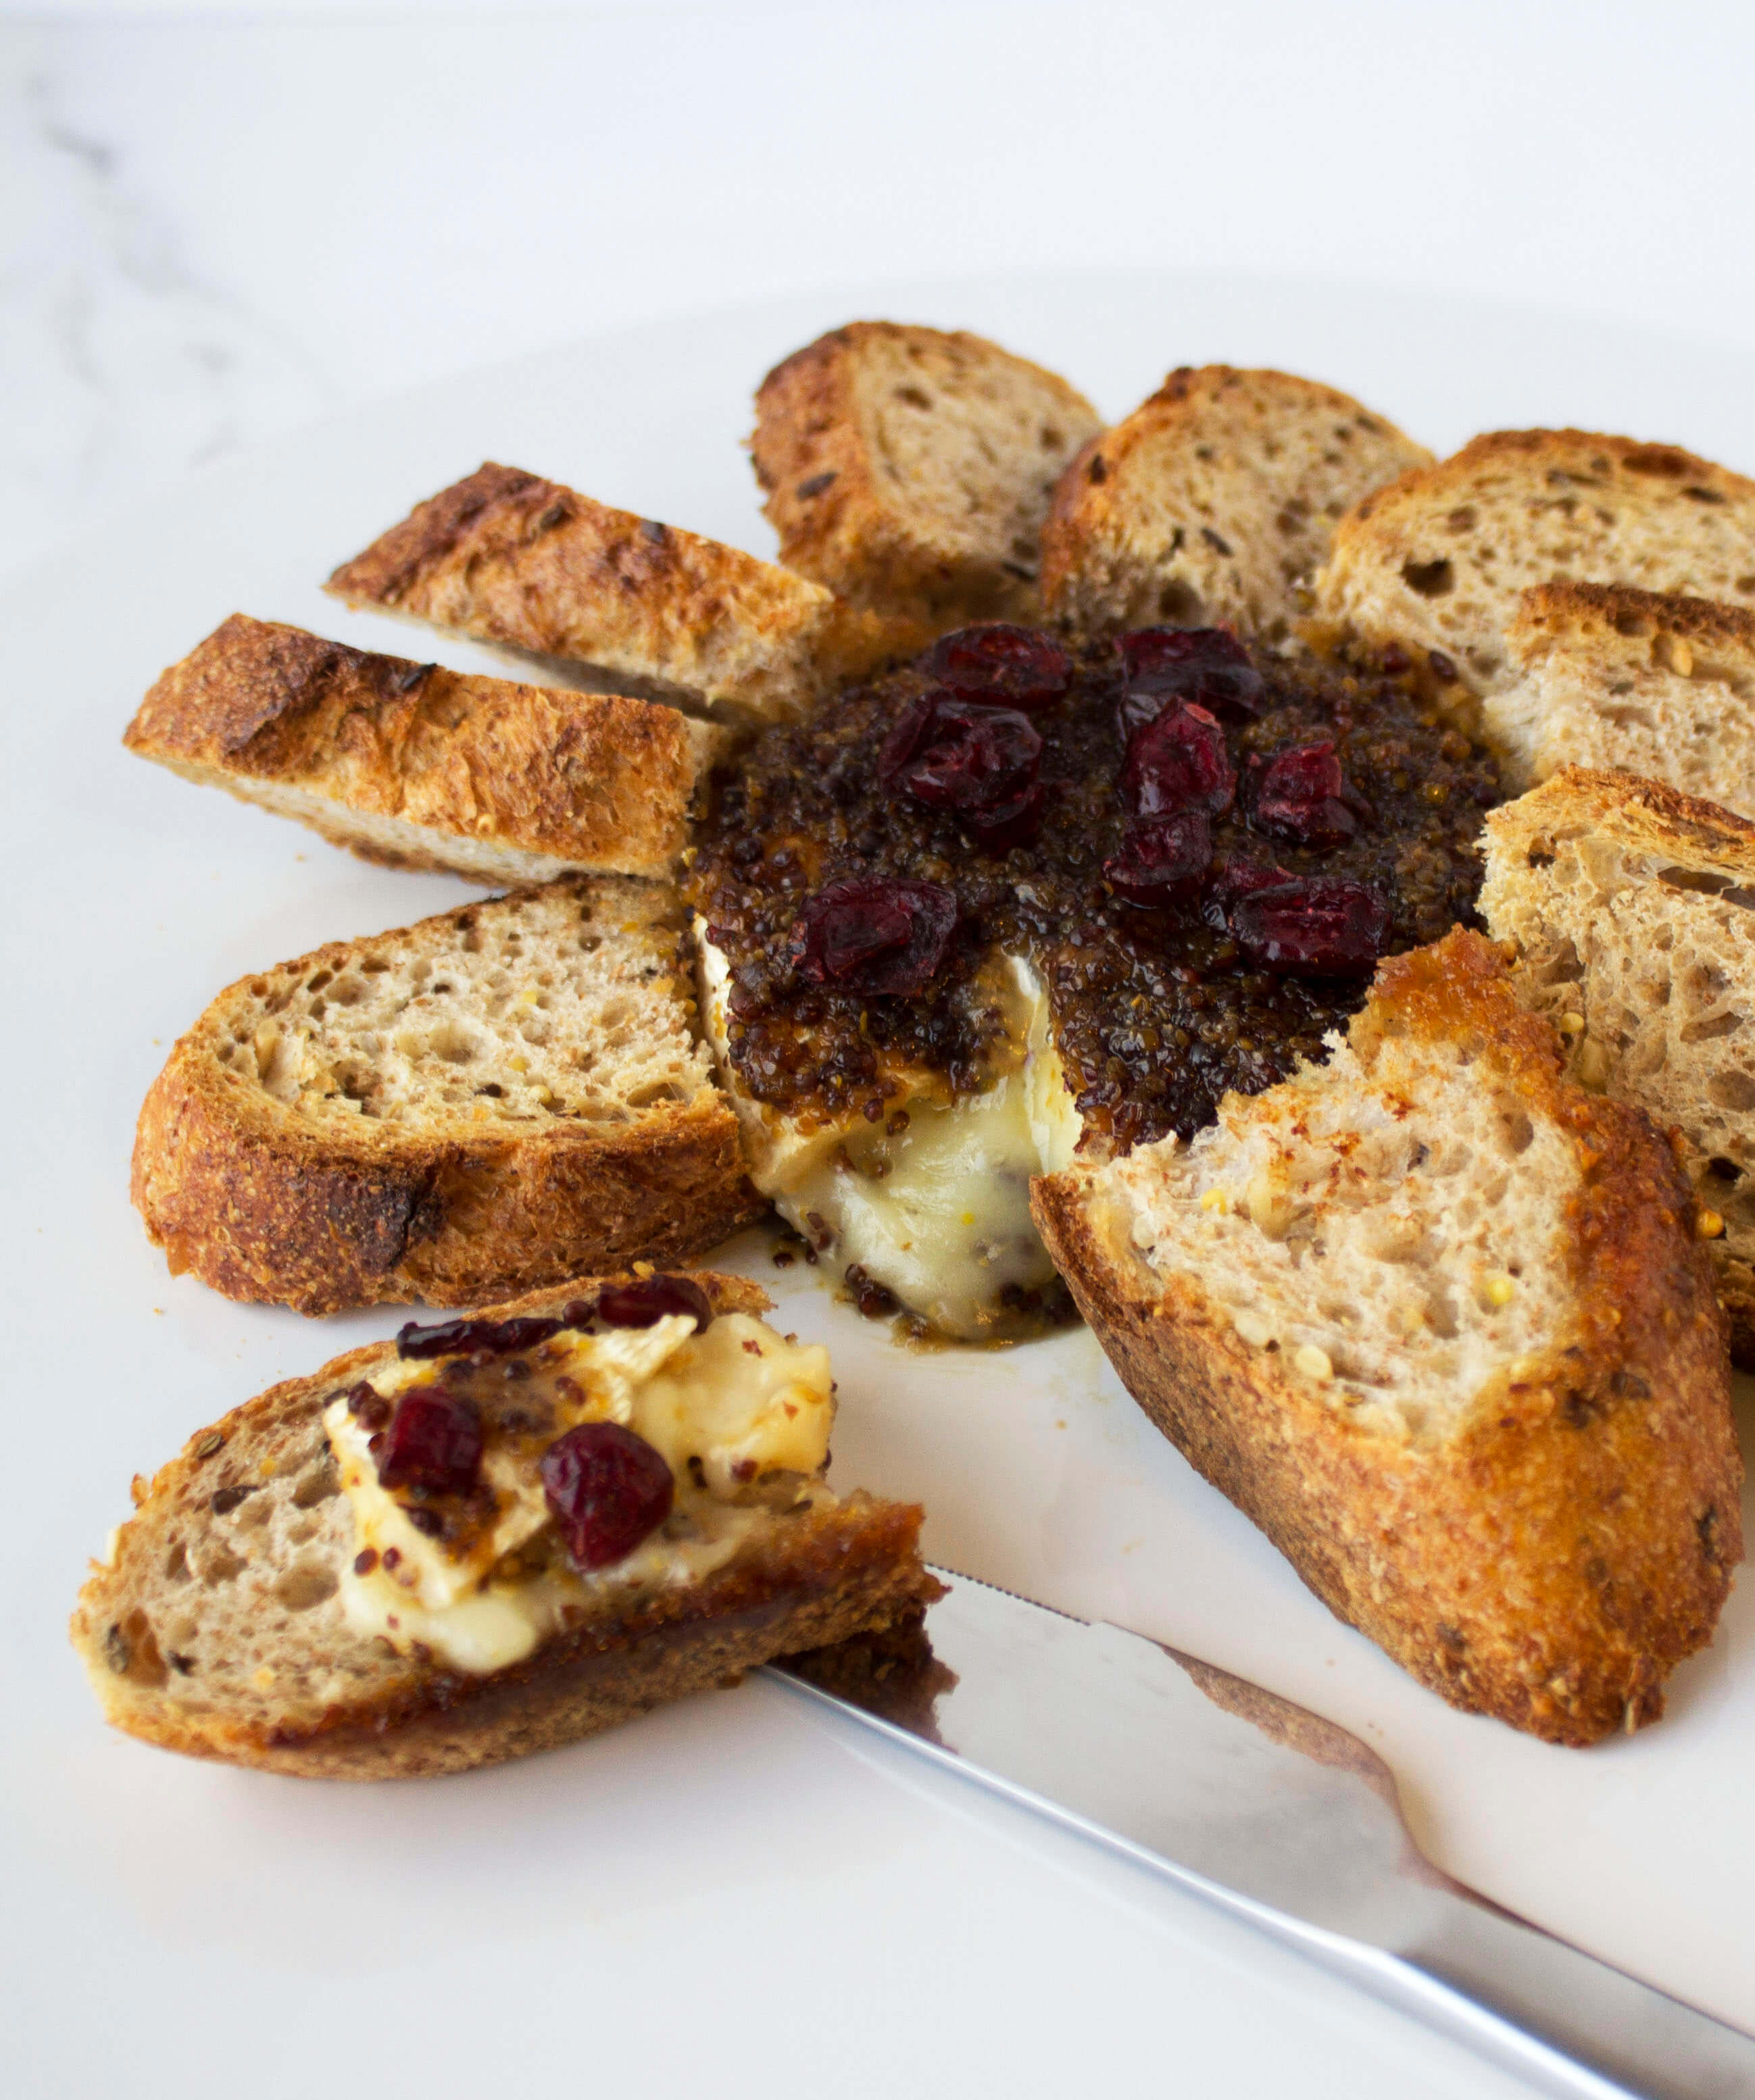 Baked Brie with Multigrain Baguette